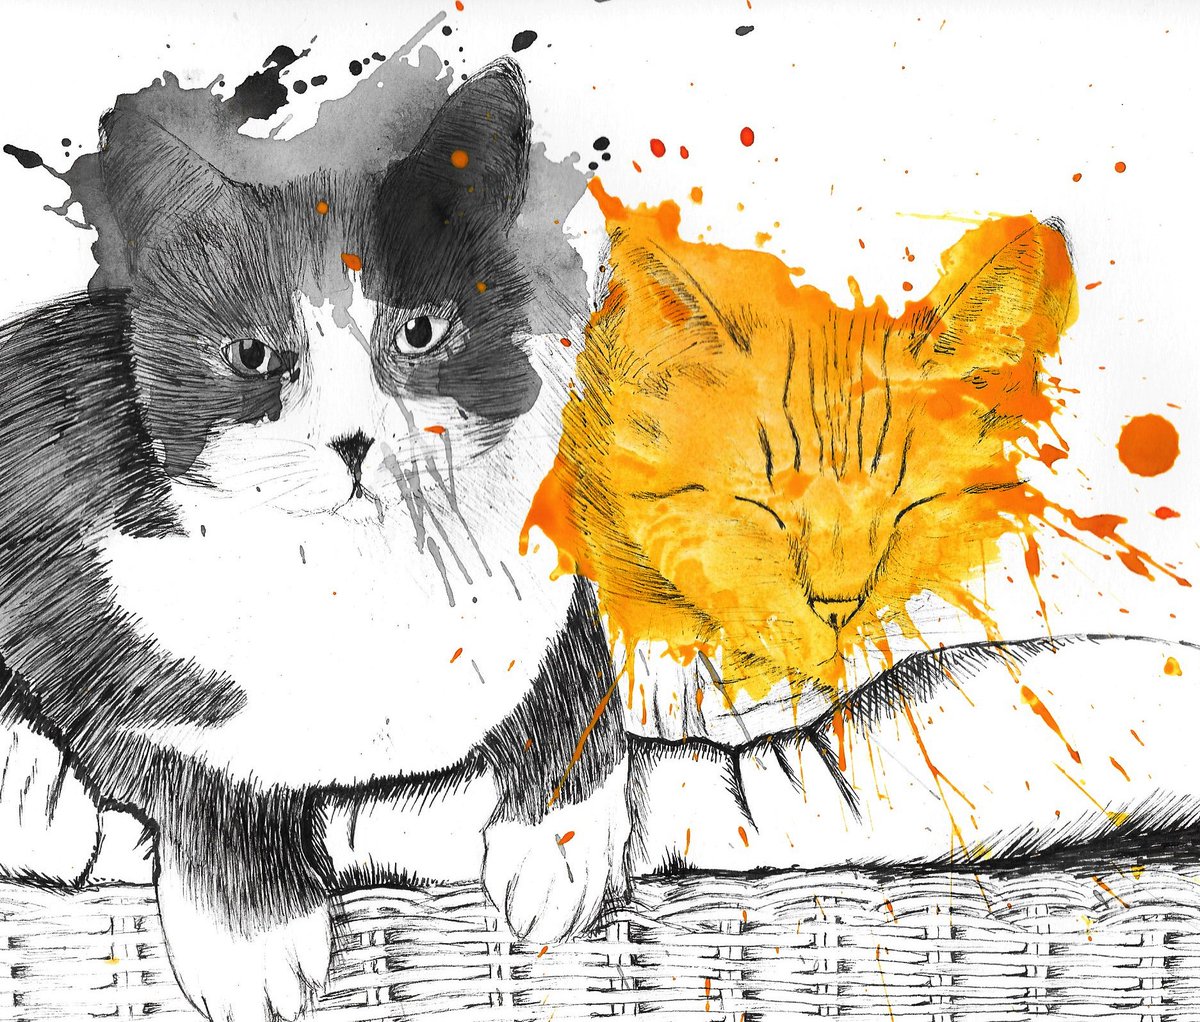 My first commissioned work, of Oreo and Mufasa #catportrait #inkwatercolour